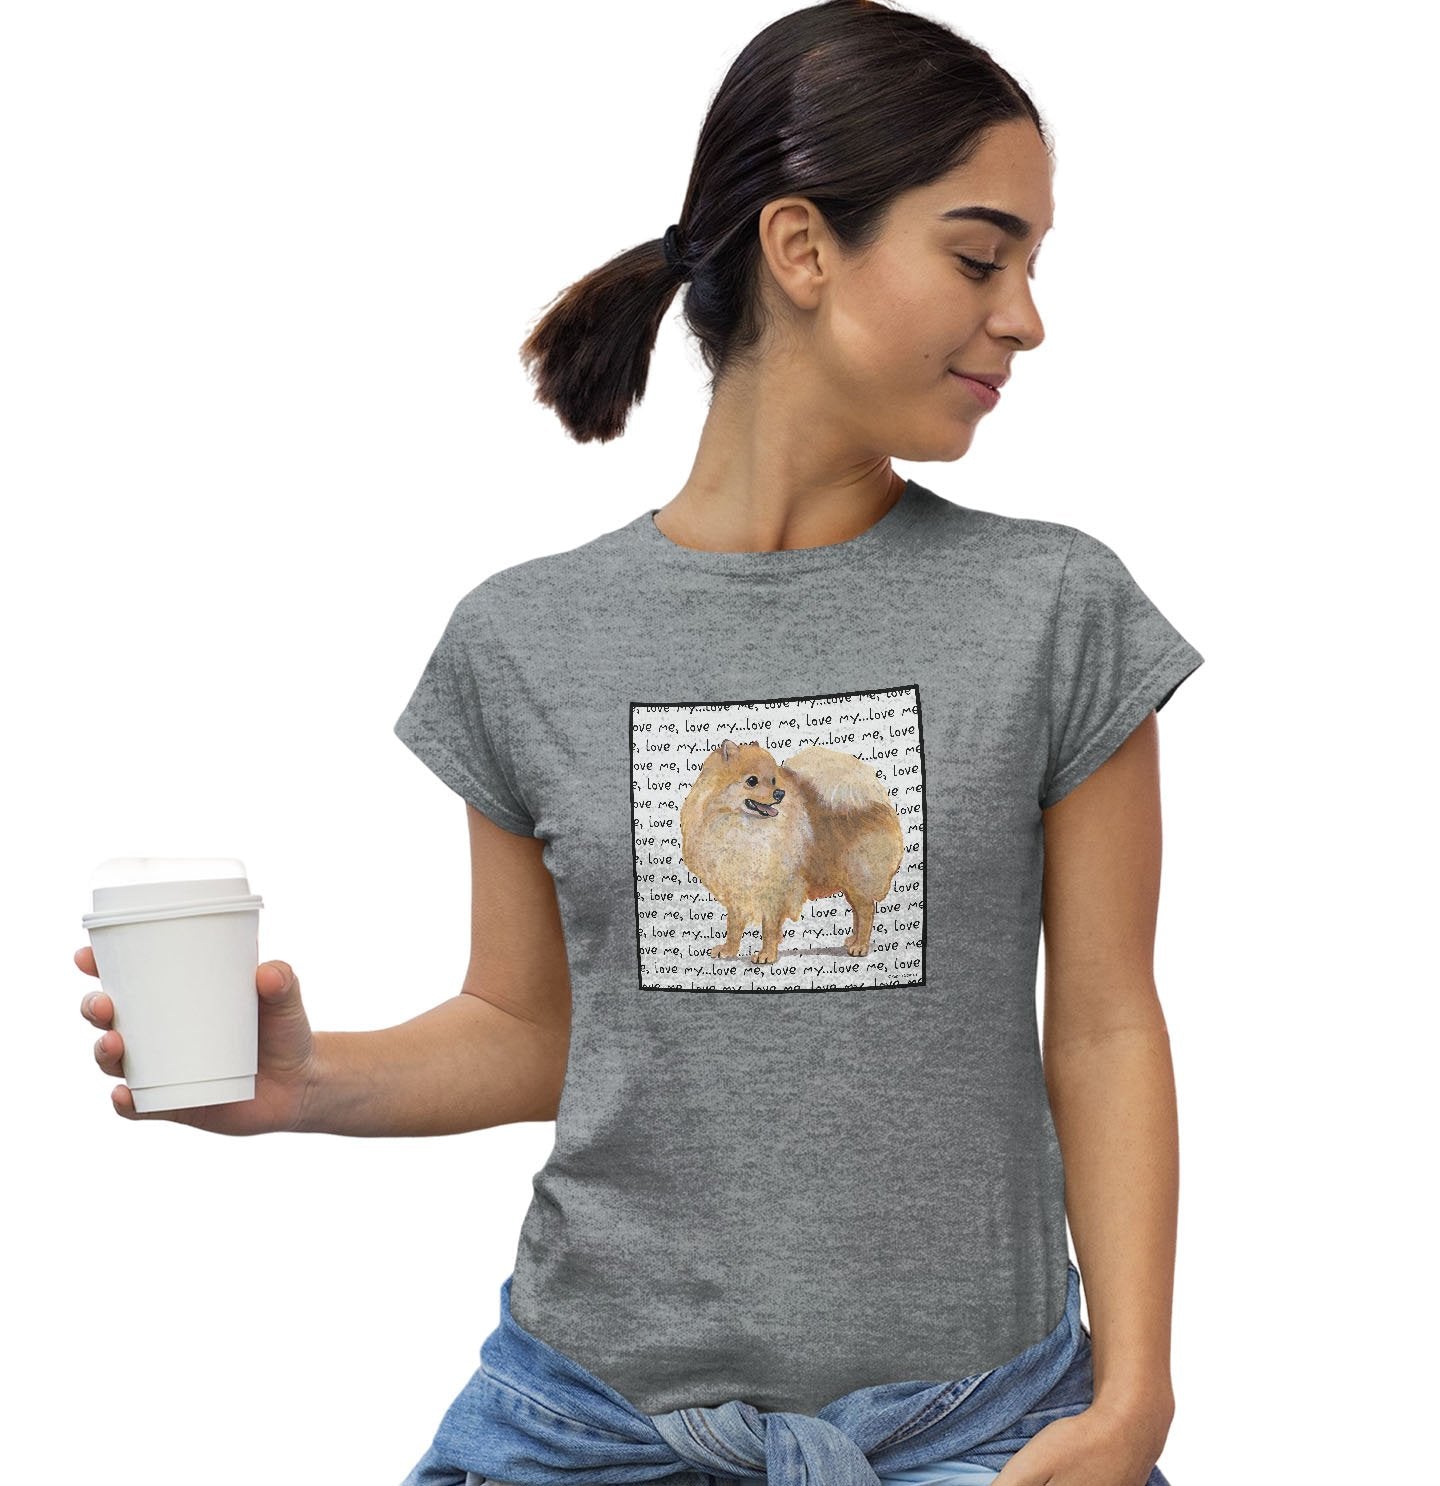 Animal Pride - Pomeranian Love Text - Women's Fitted T-Shirt